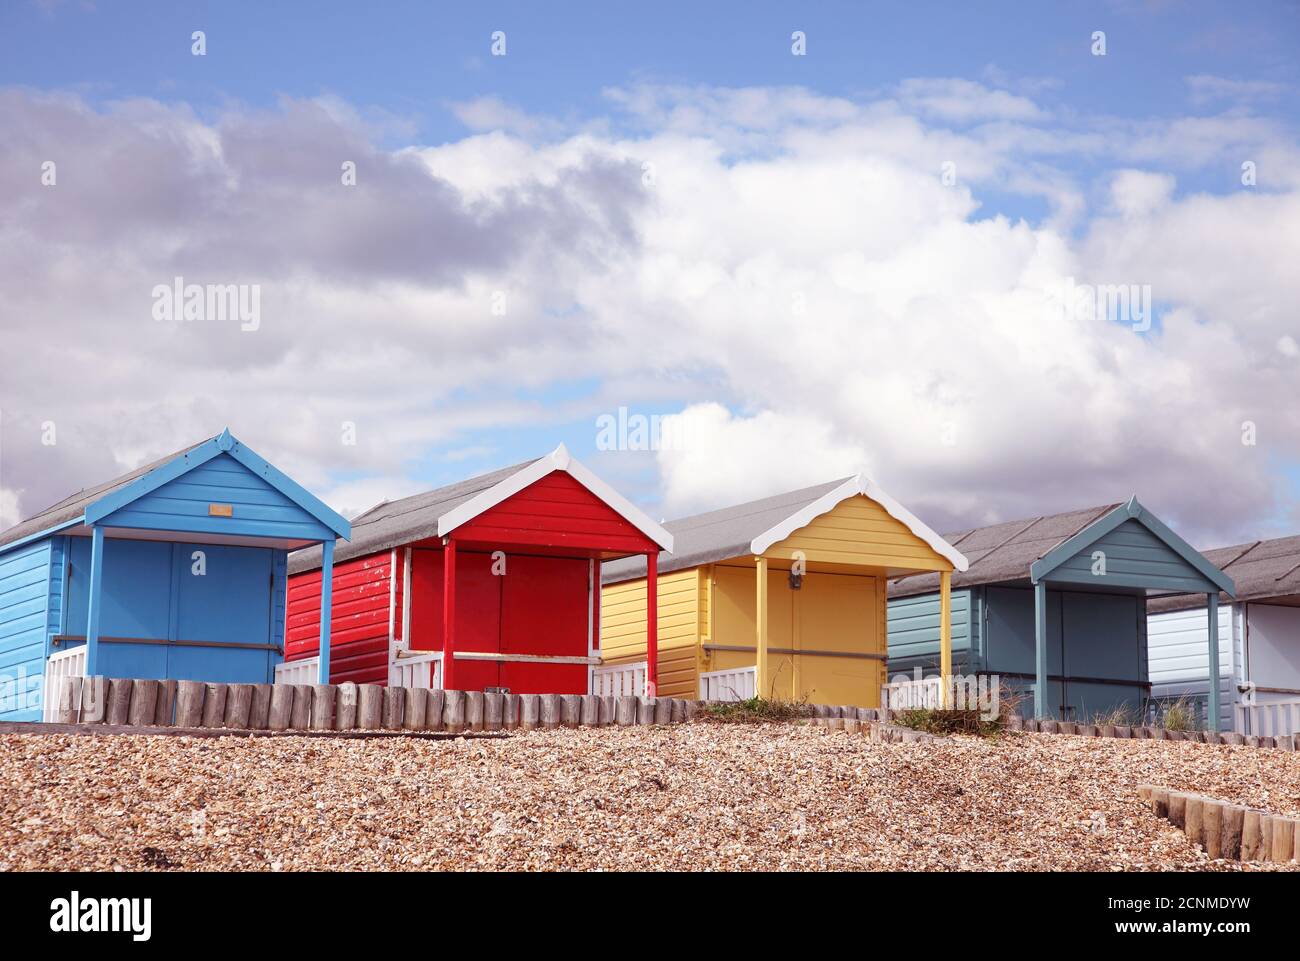 Primary coloured, red, yellow, blue row of beach huts at English seaside beach, Calshot, Hampshire. Stock Photo